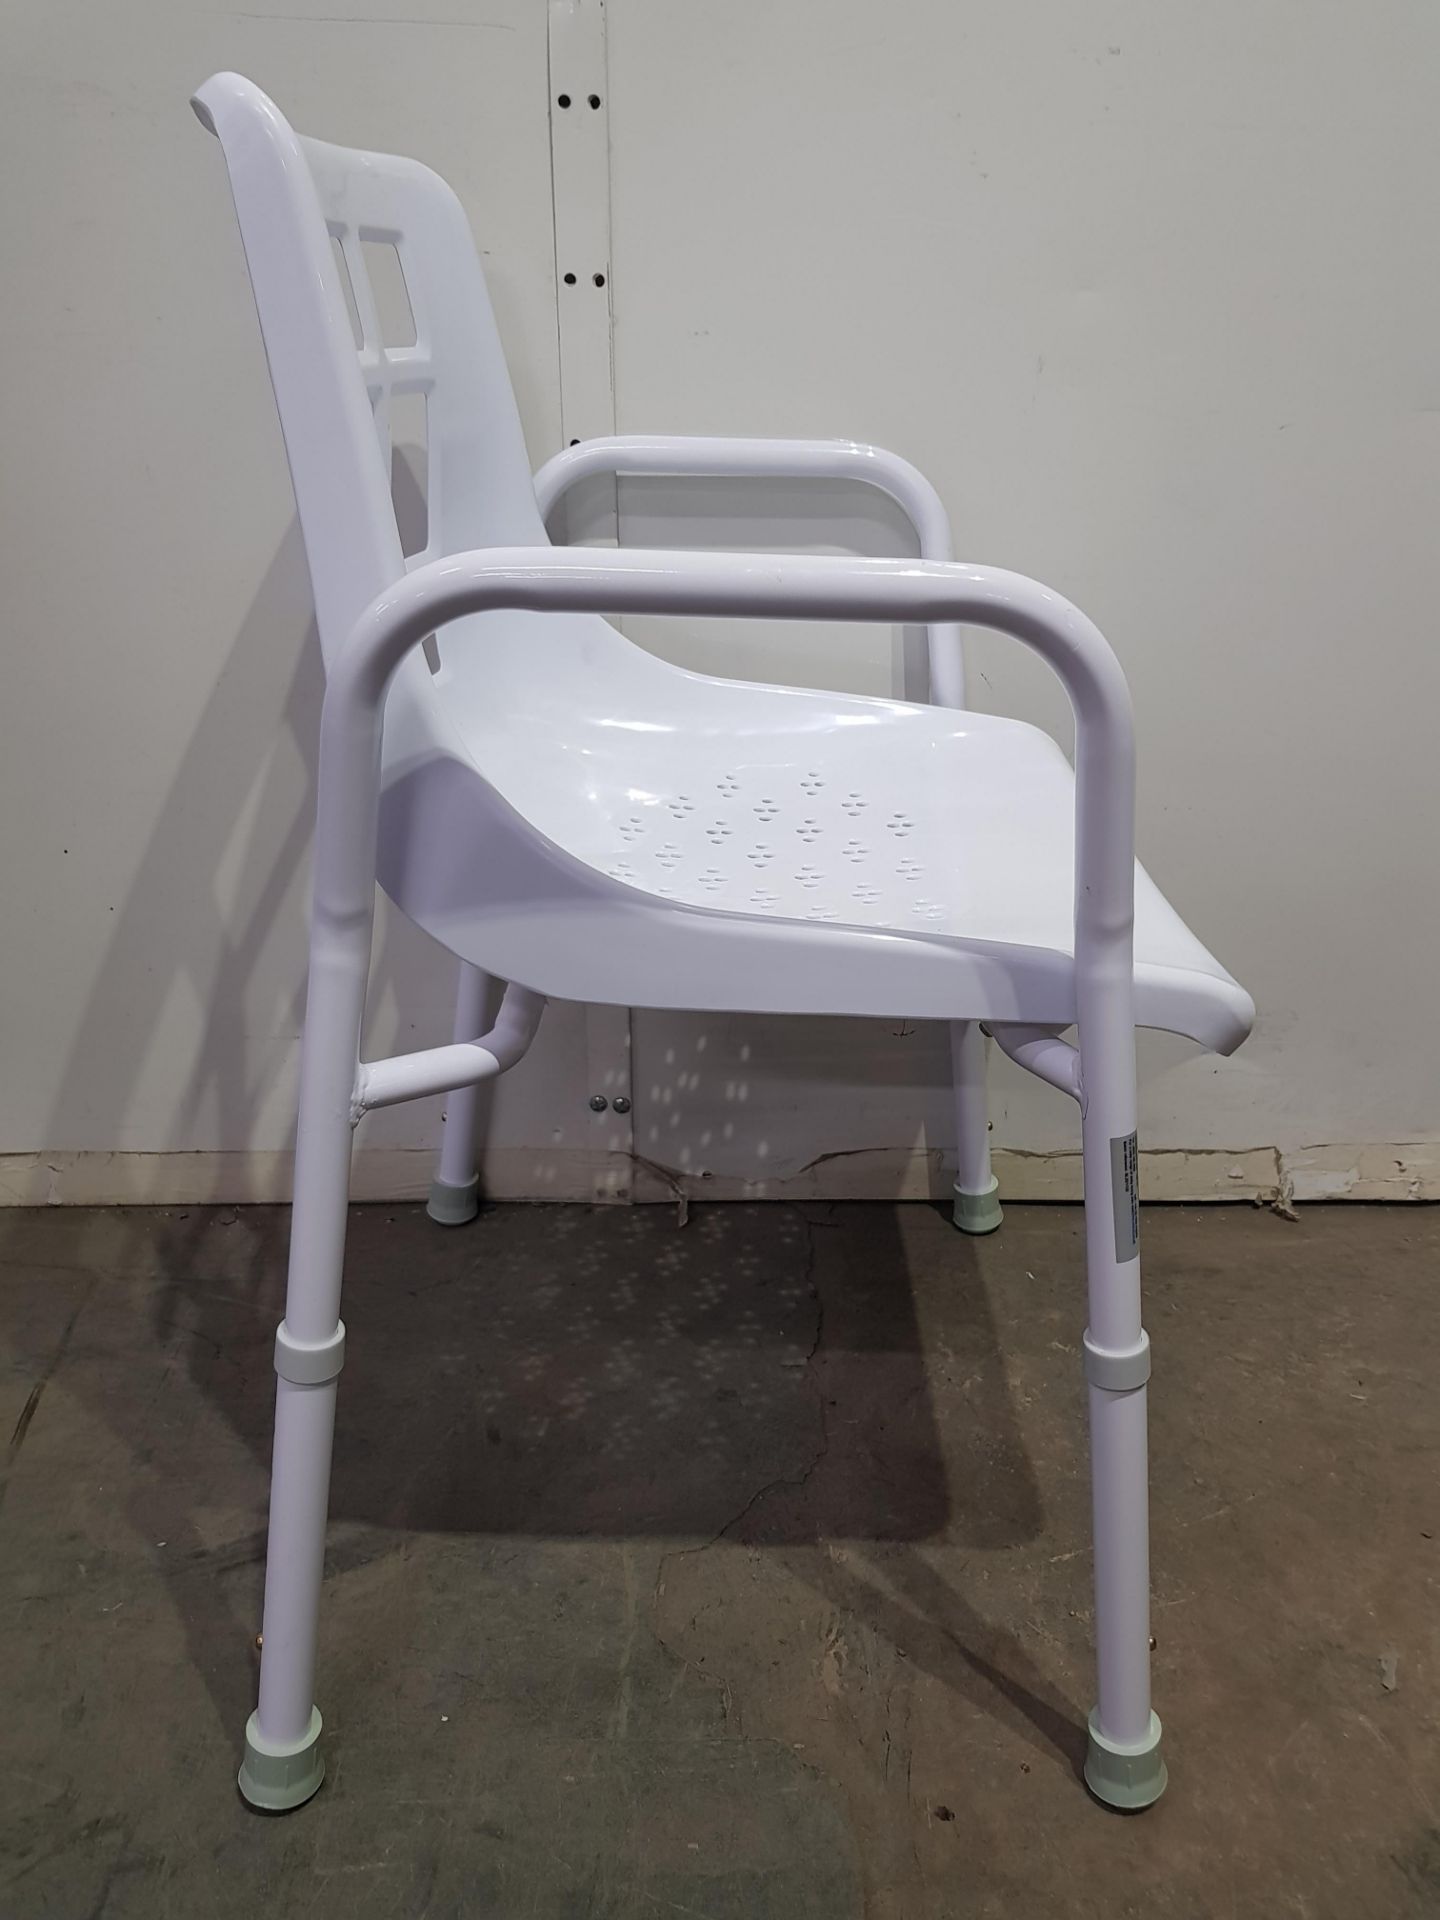 Shower Chair Height Adjustable - Image 2 of 3